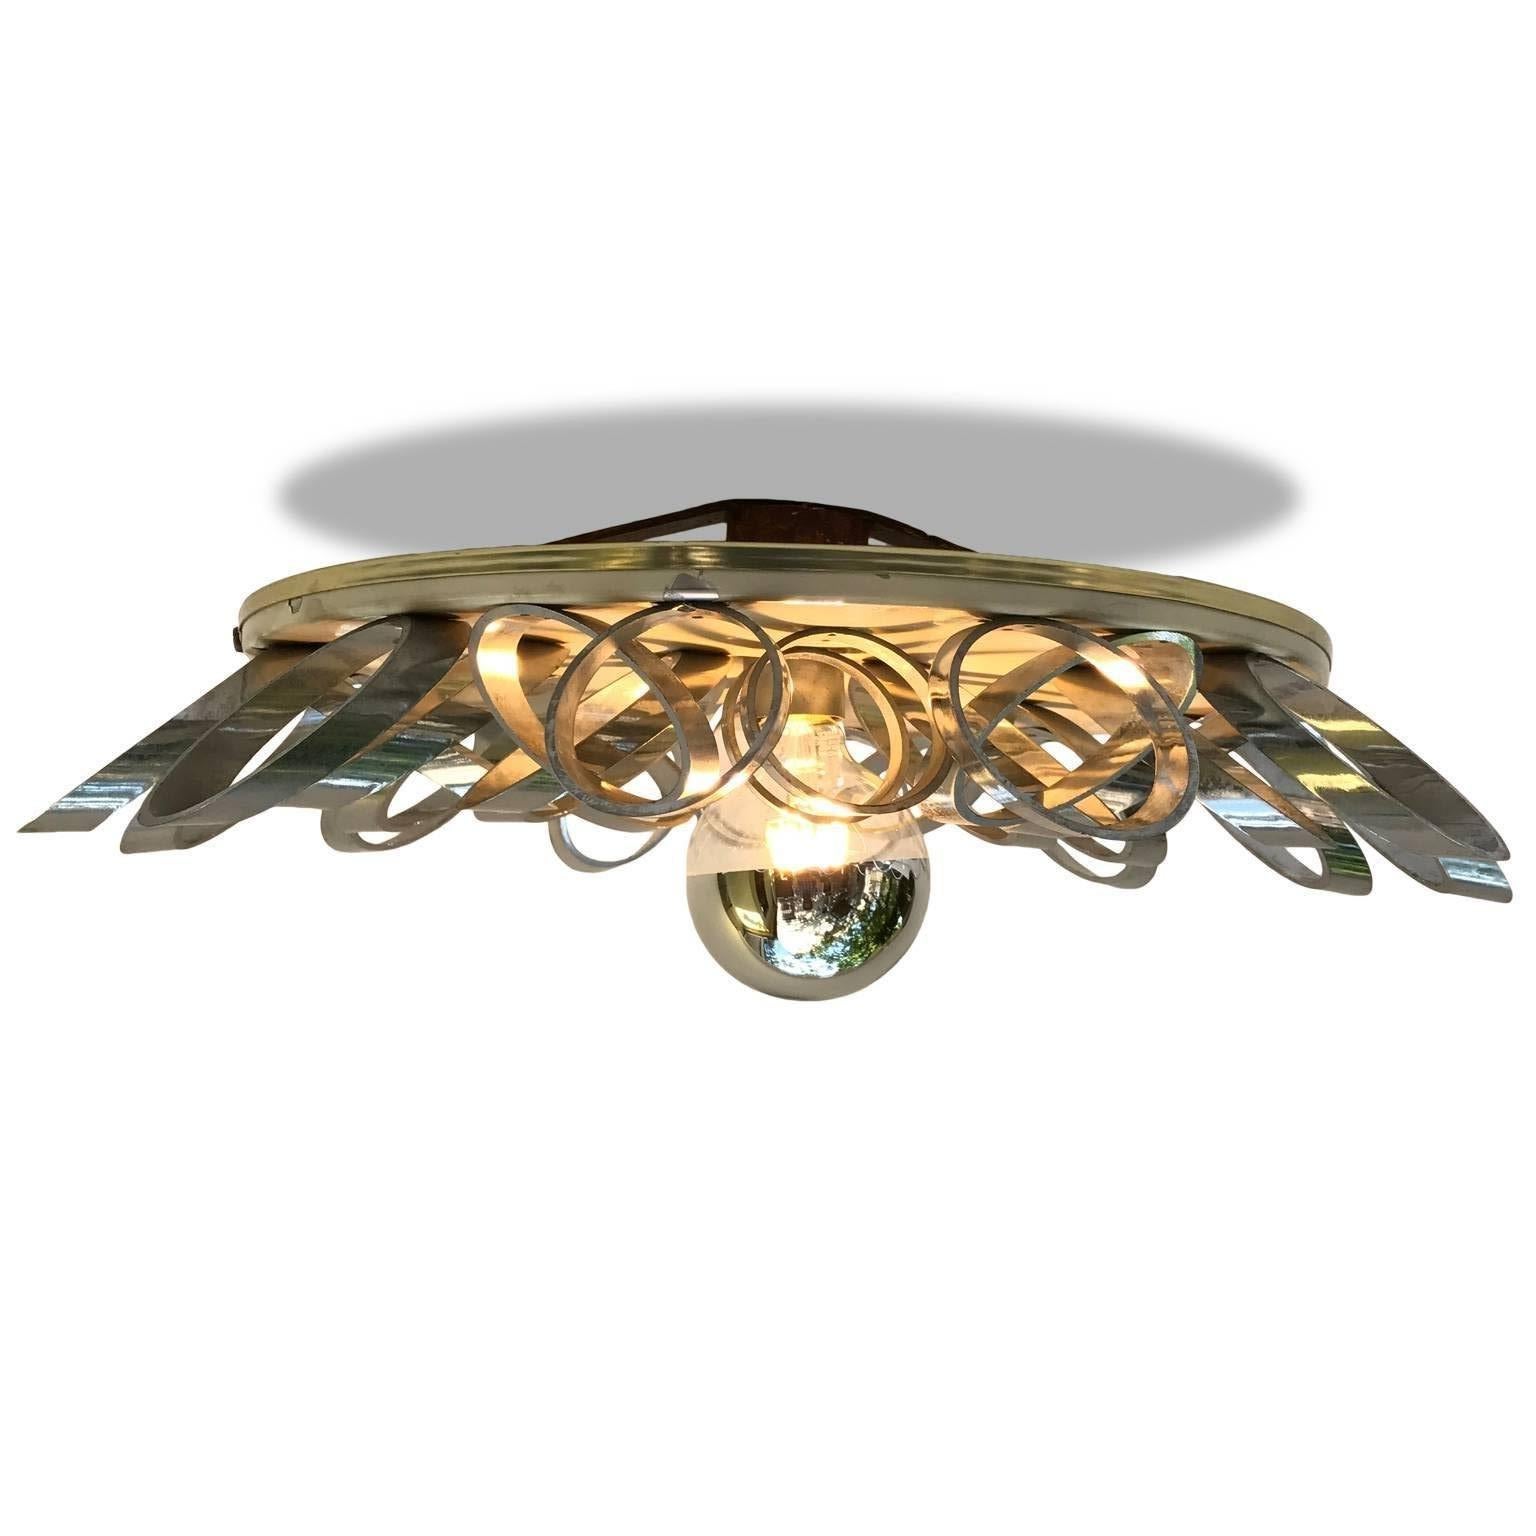 Mid-Century Modern 1970s Italian Metal and Chromed Plastic One-Light Ceiling Fixture or Sconce